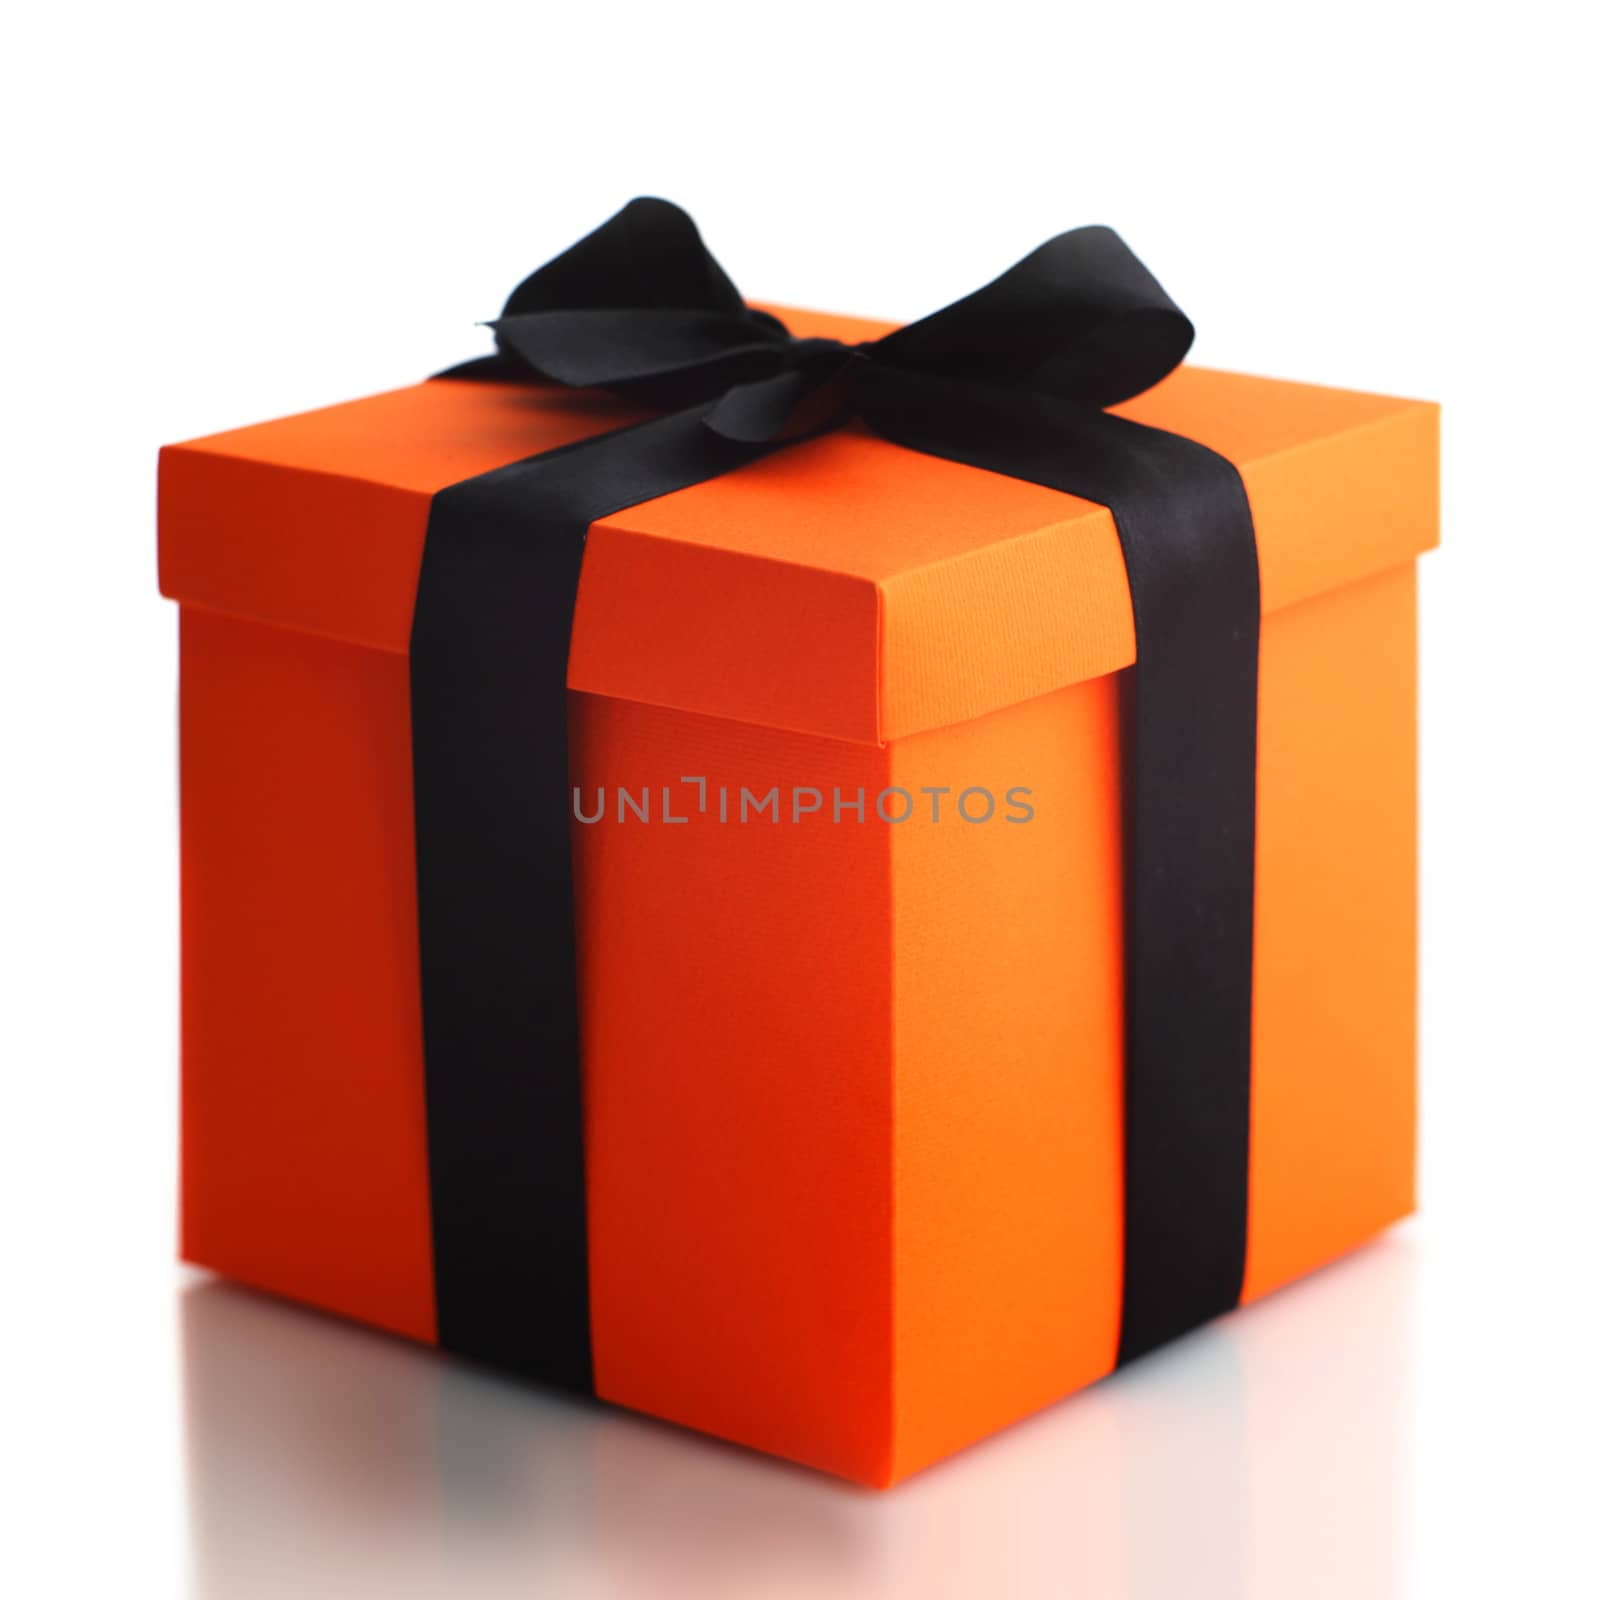 Decorated black and orange halloween gift box isolated on white background with reflection